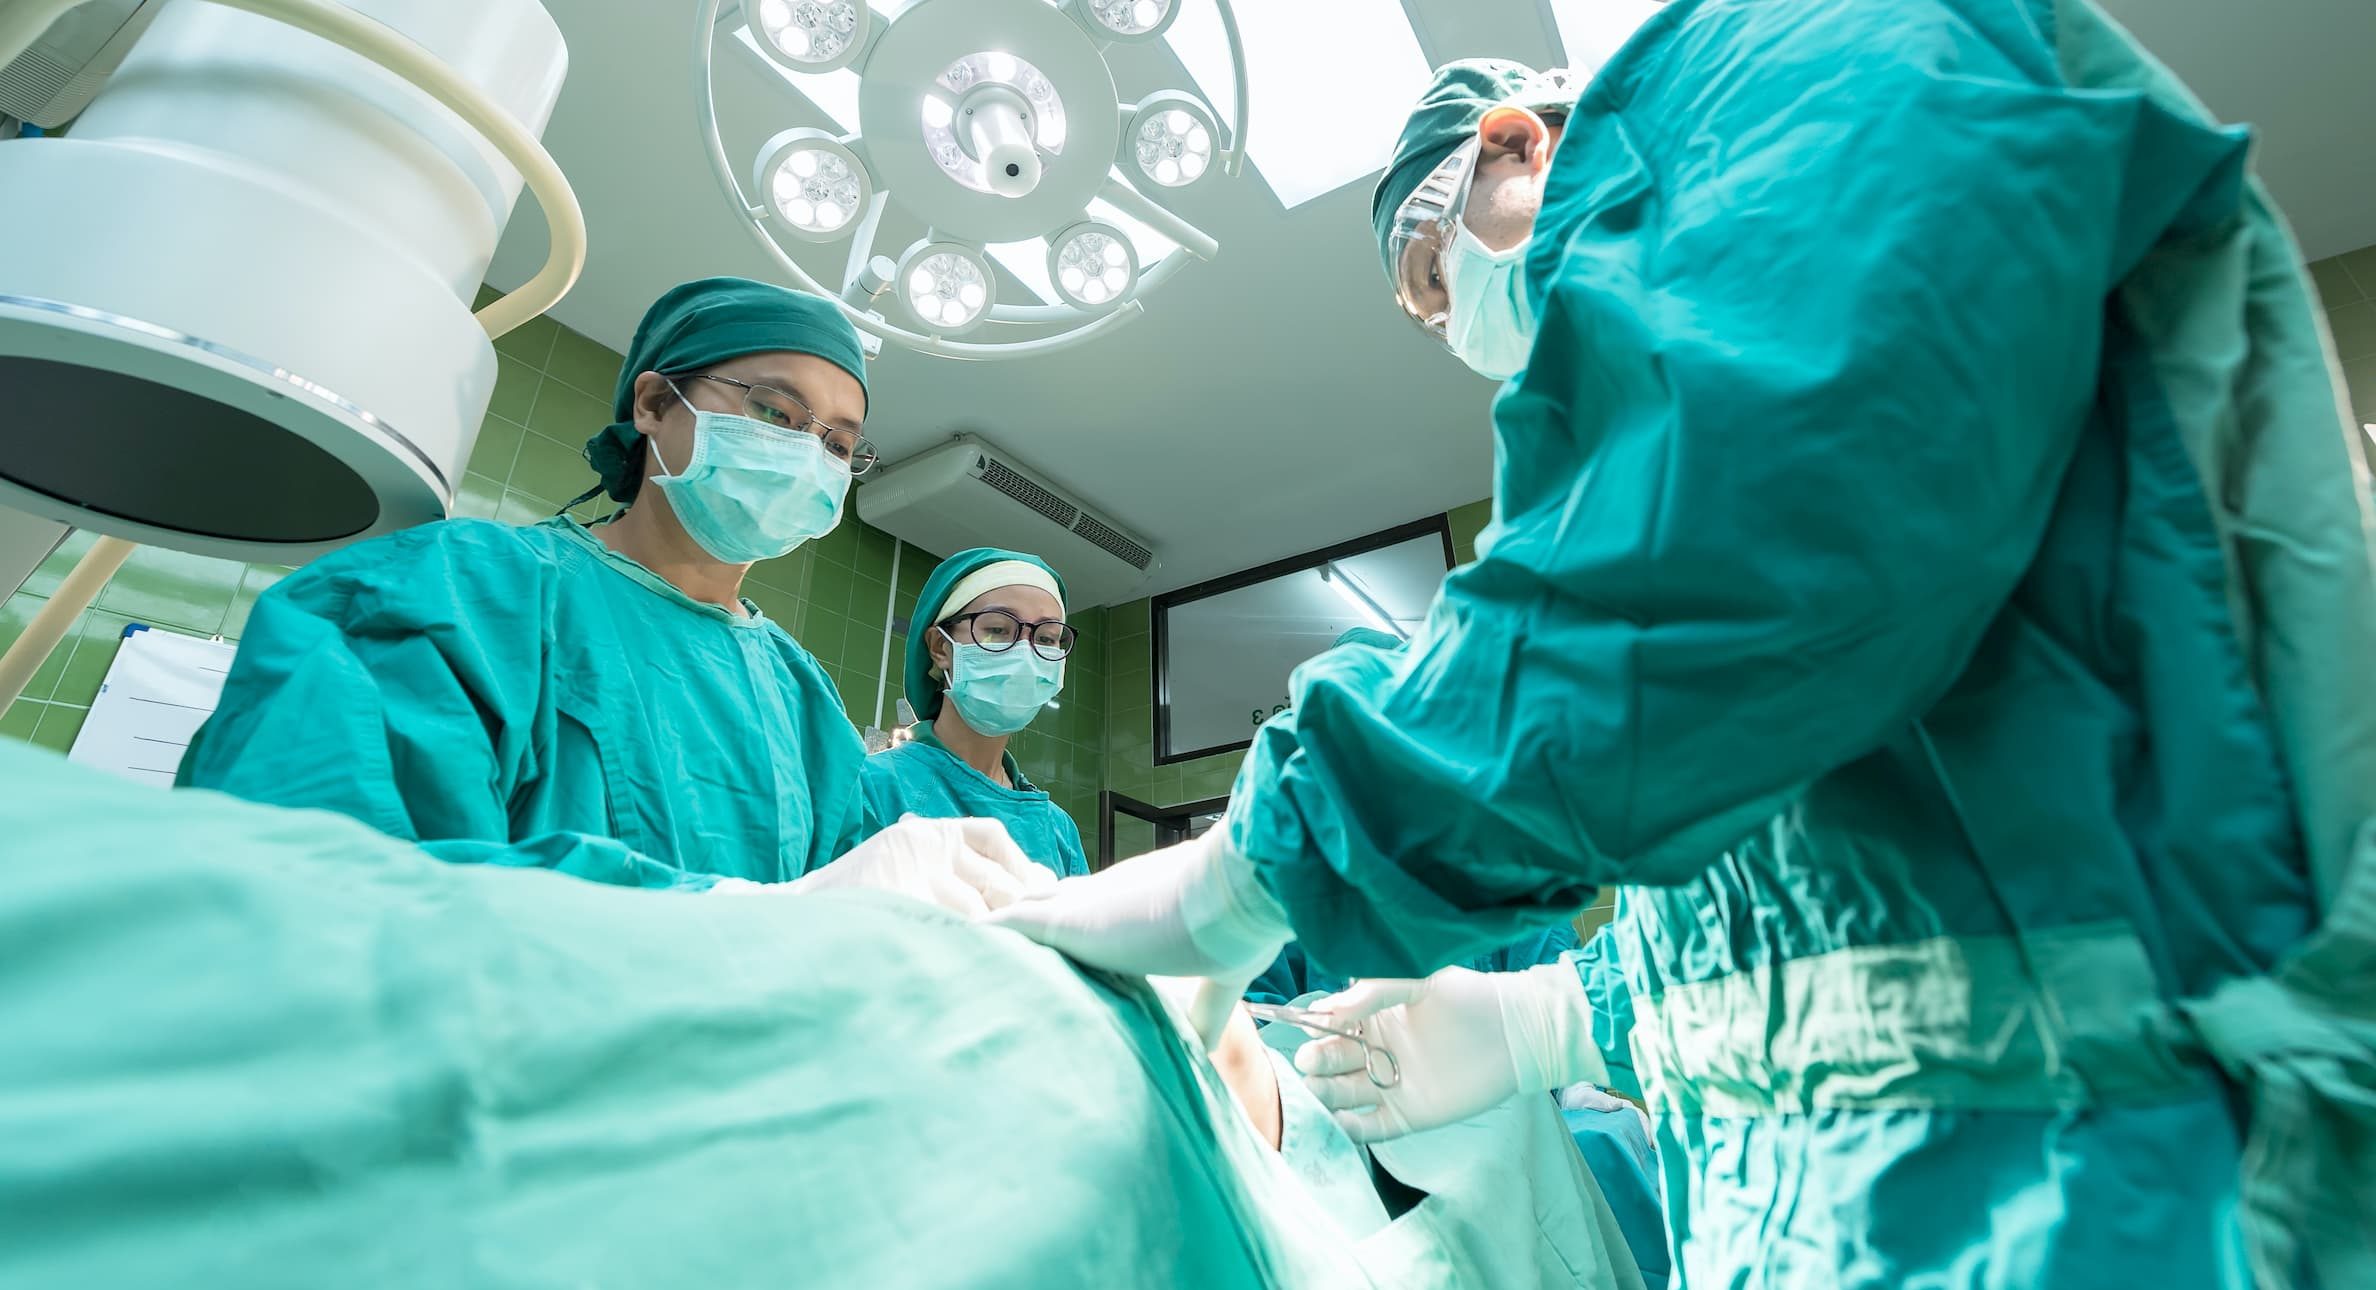 three doctors wearing aqua scrubs in surgery performing a procedure in an operating room on a patient who is laying on a table